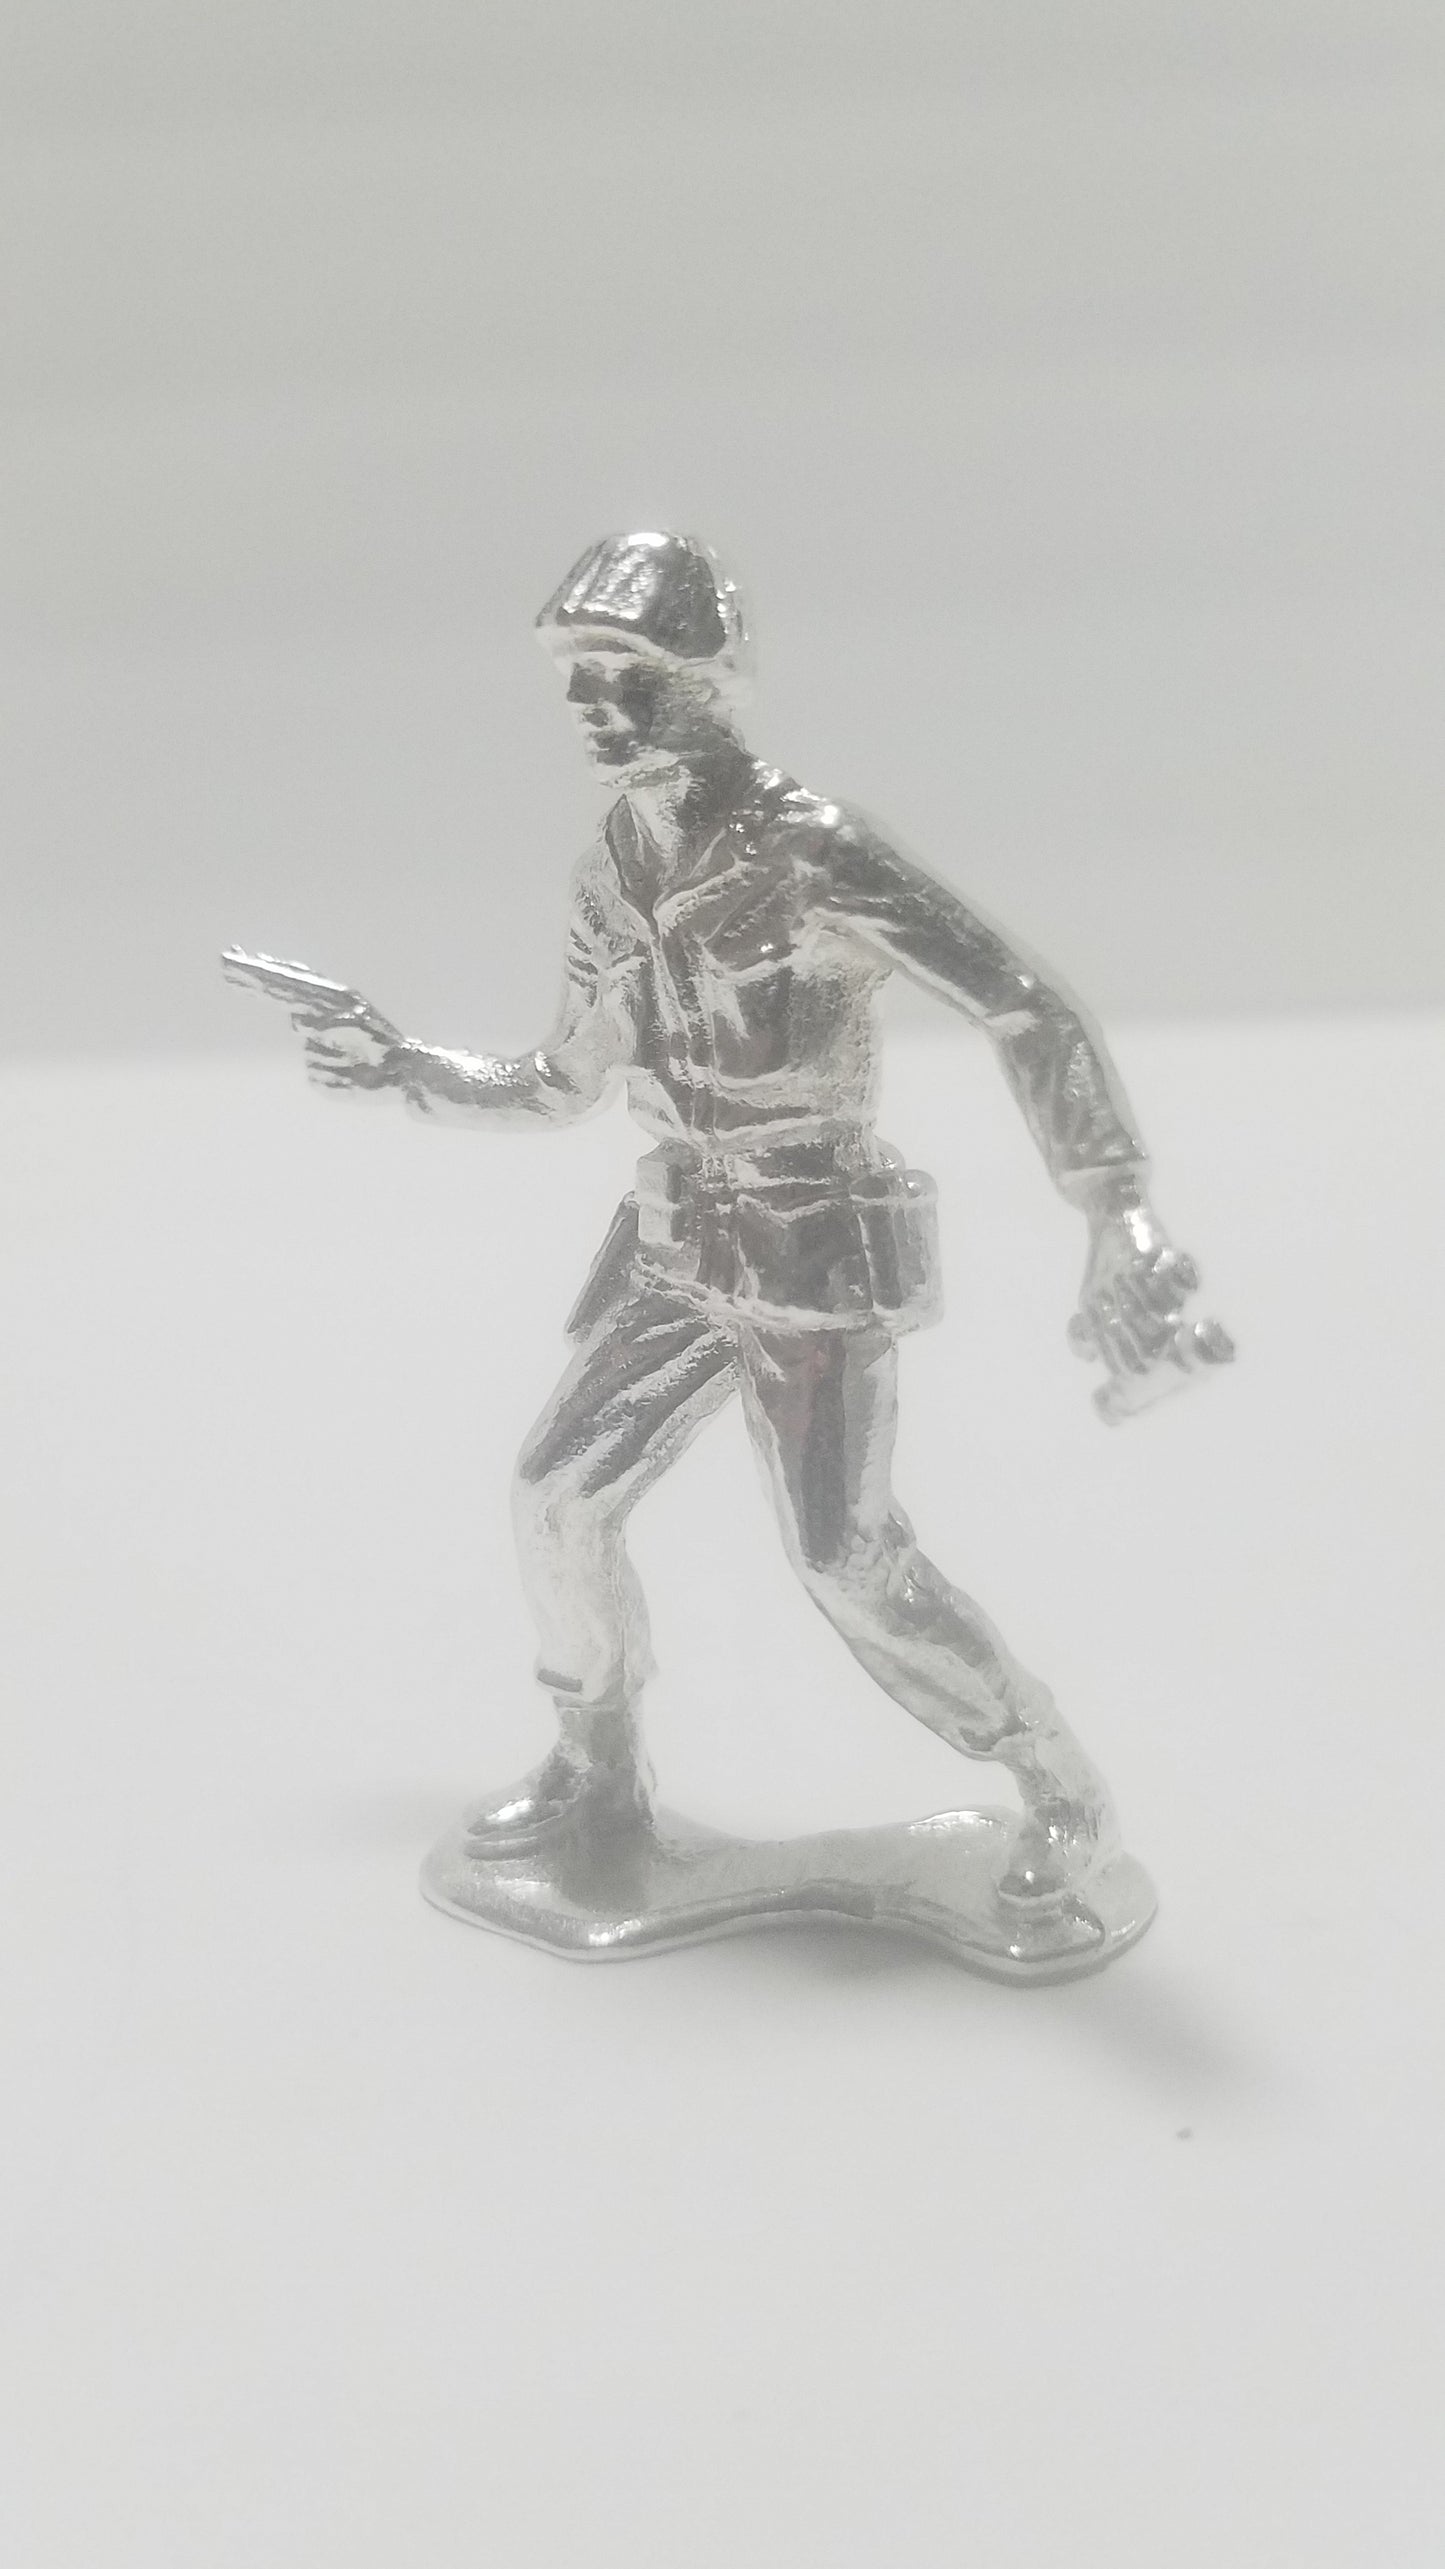 Classic Army Man Sarge Silver Toy Soldier .999 Fine Silver